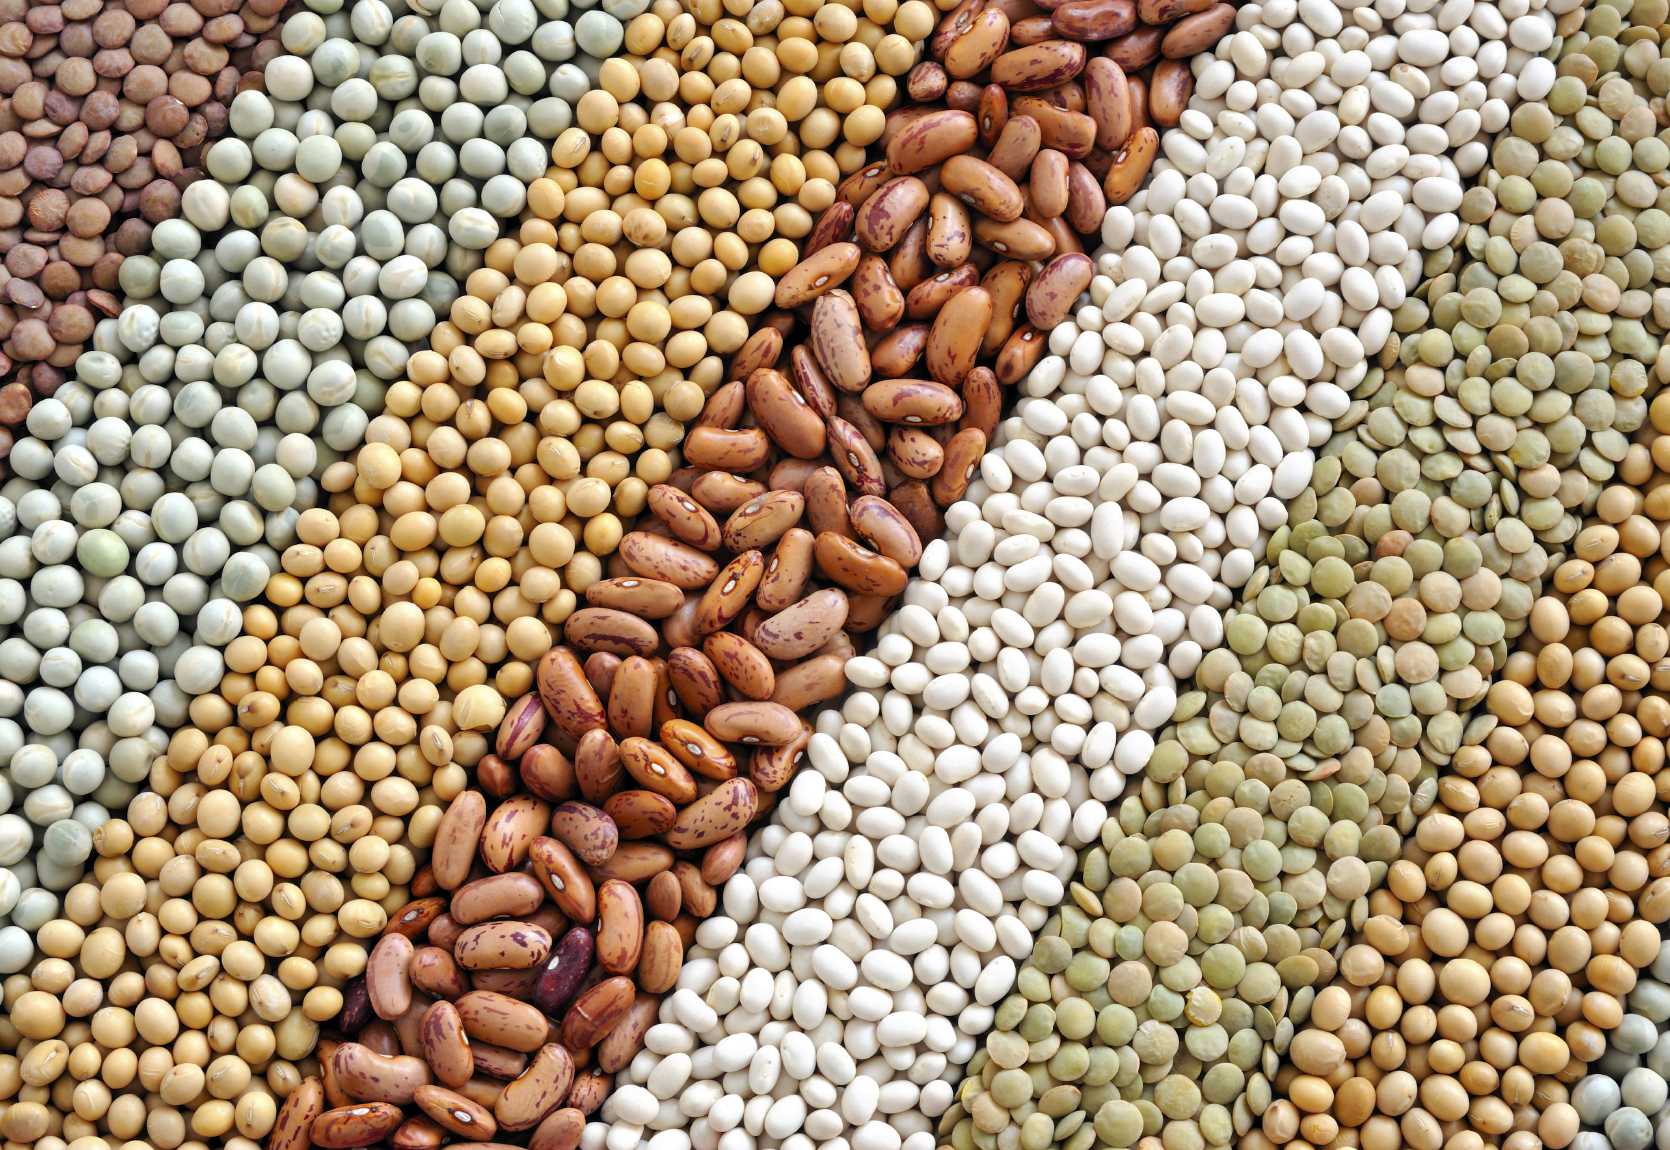 Food prices hit two-year high, amid 'mixed' grain crop outlook ...